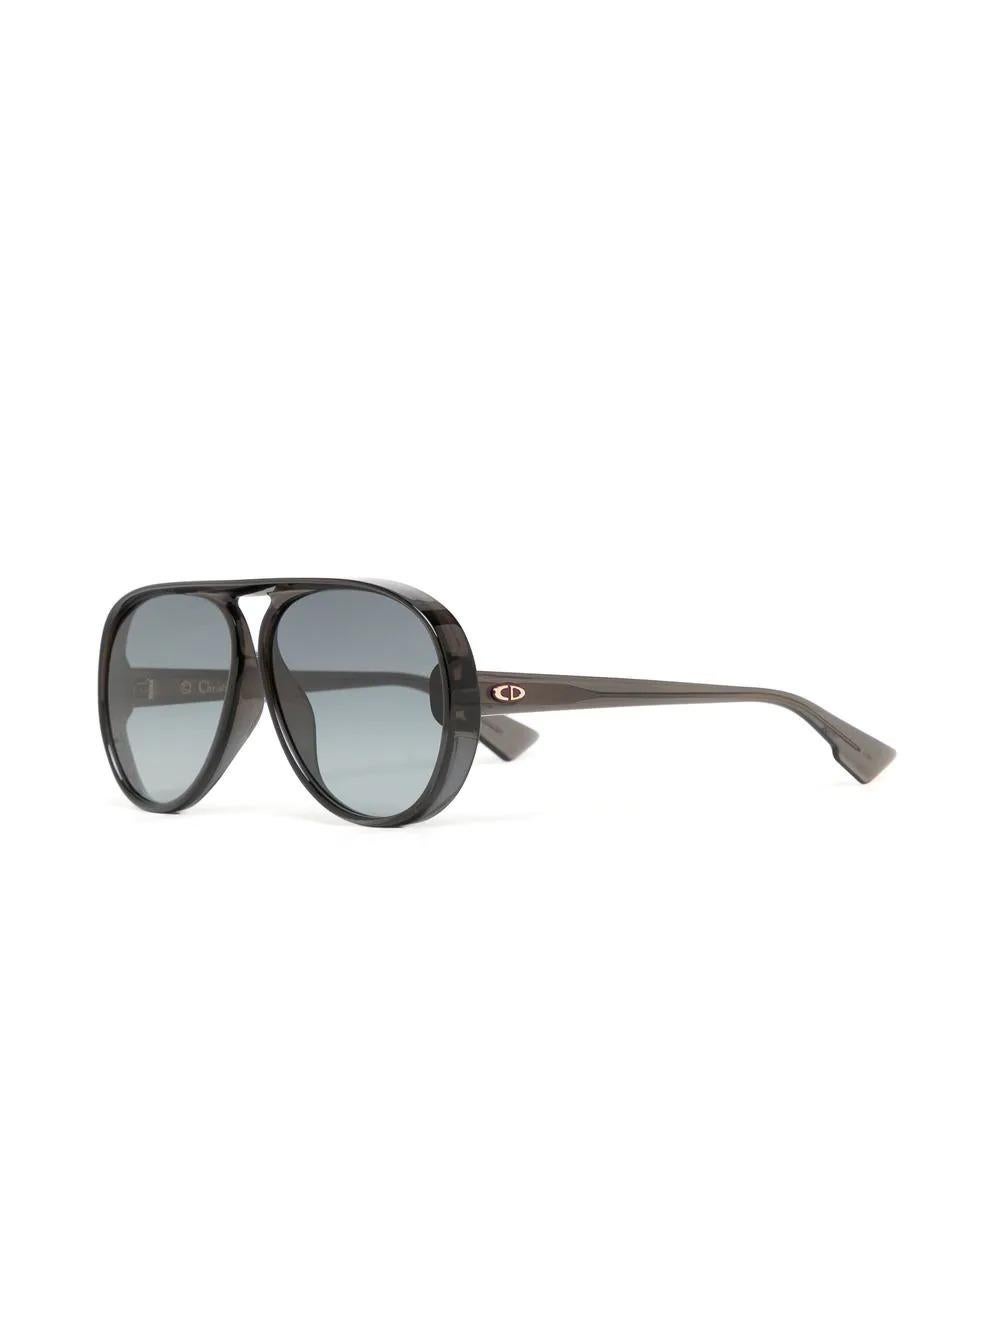 The perfect face-framing accessory, these pre-owned Dior aviator sunglasses are set in black acetate frames with curving ridged edges. Finished with the brand's logo detailing at the temples, these are a must-have summer piece. They'll look